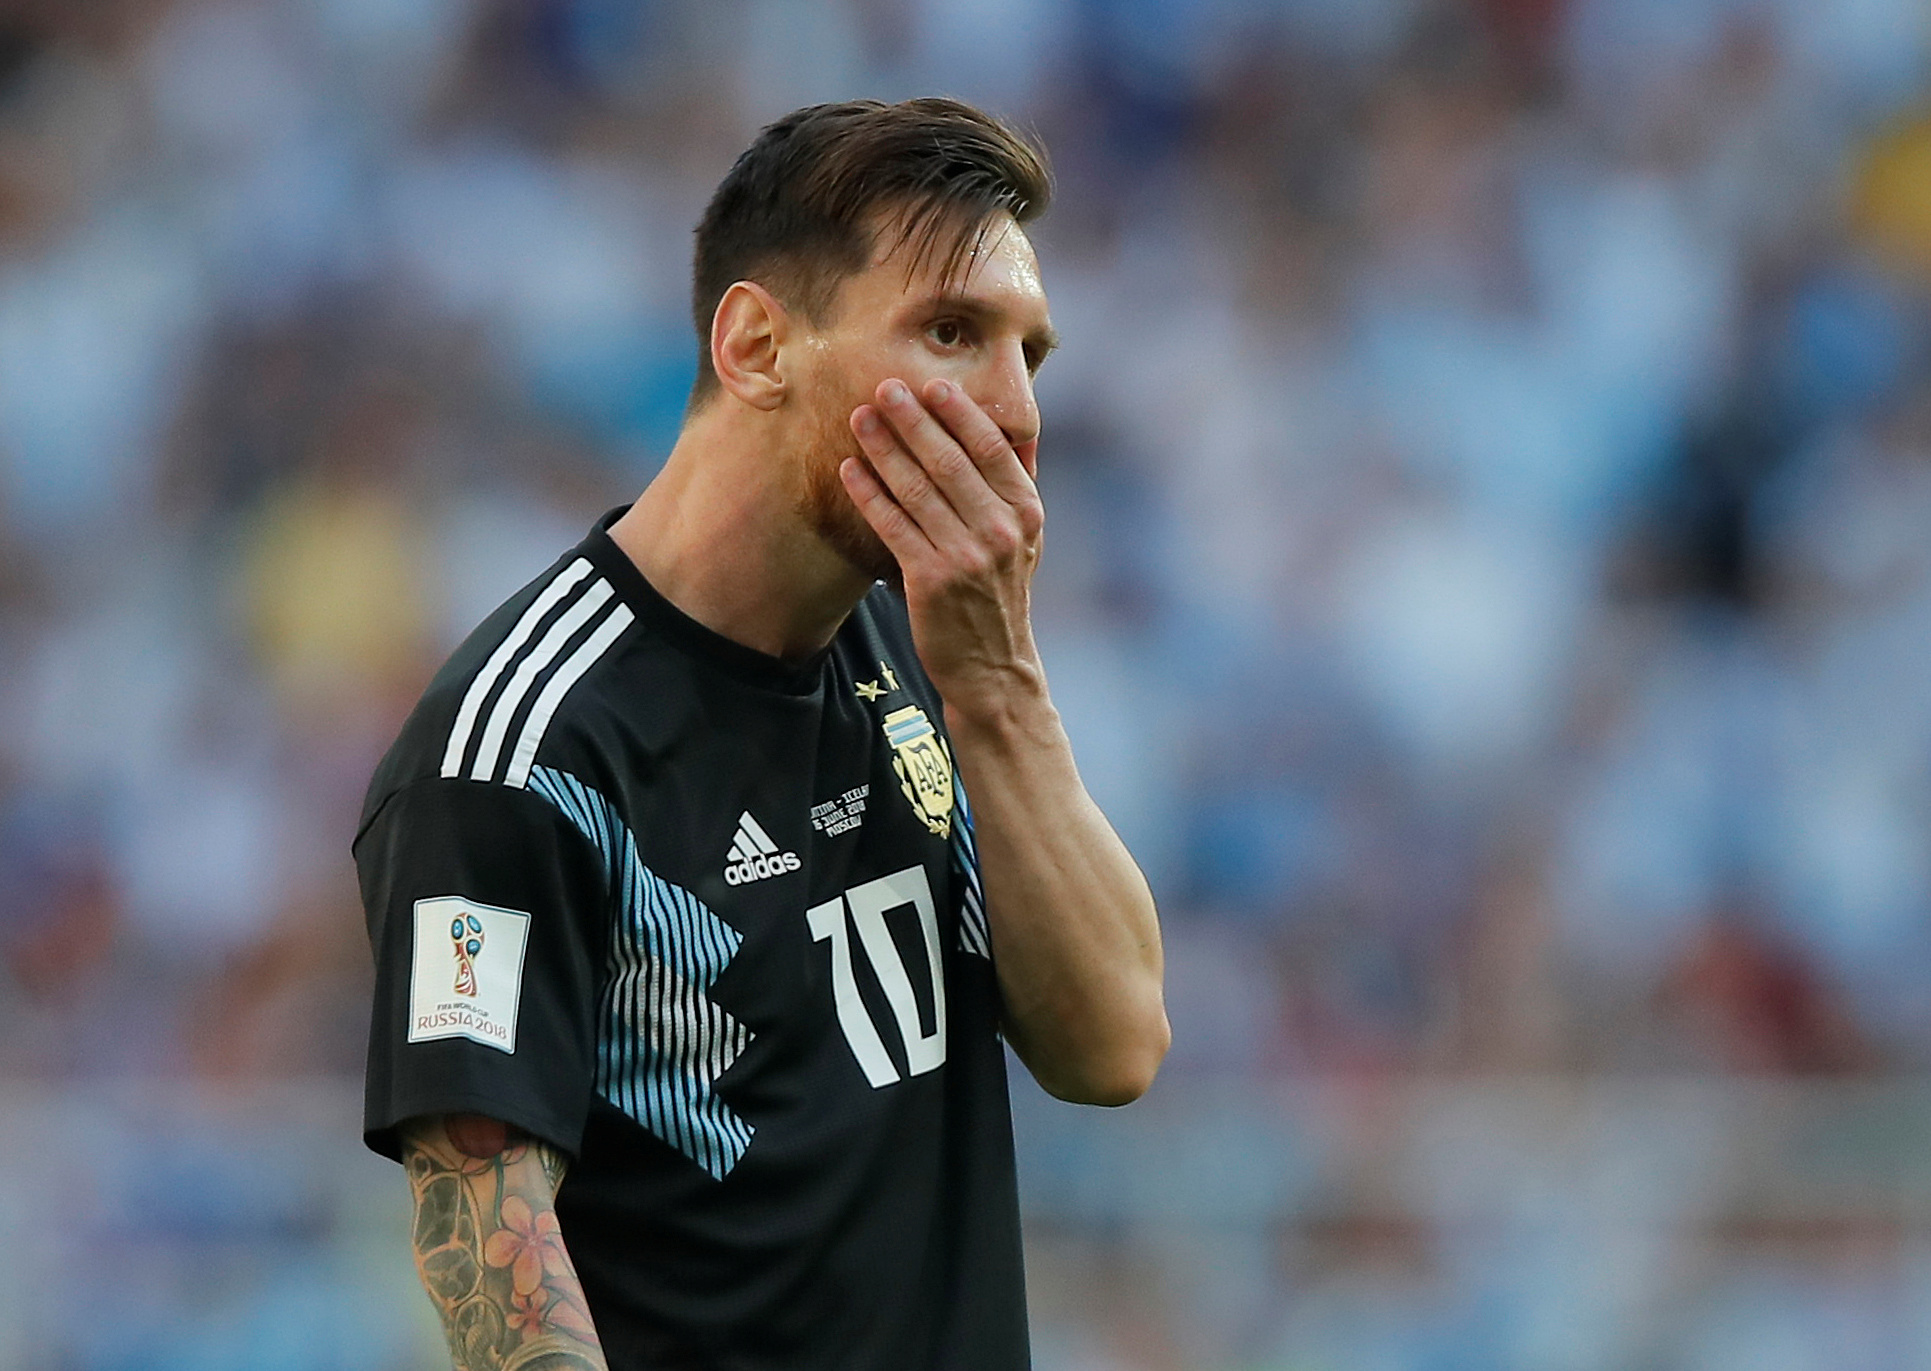 Messi misses penalty, Iceland holds Argentina to 1-1 draw